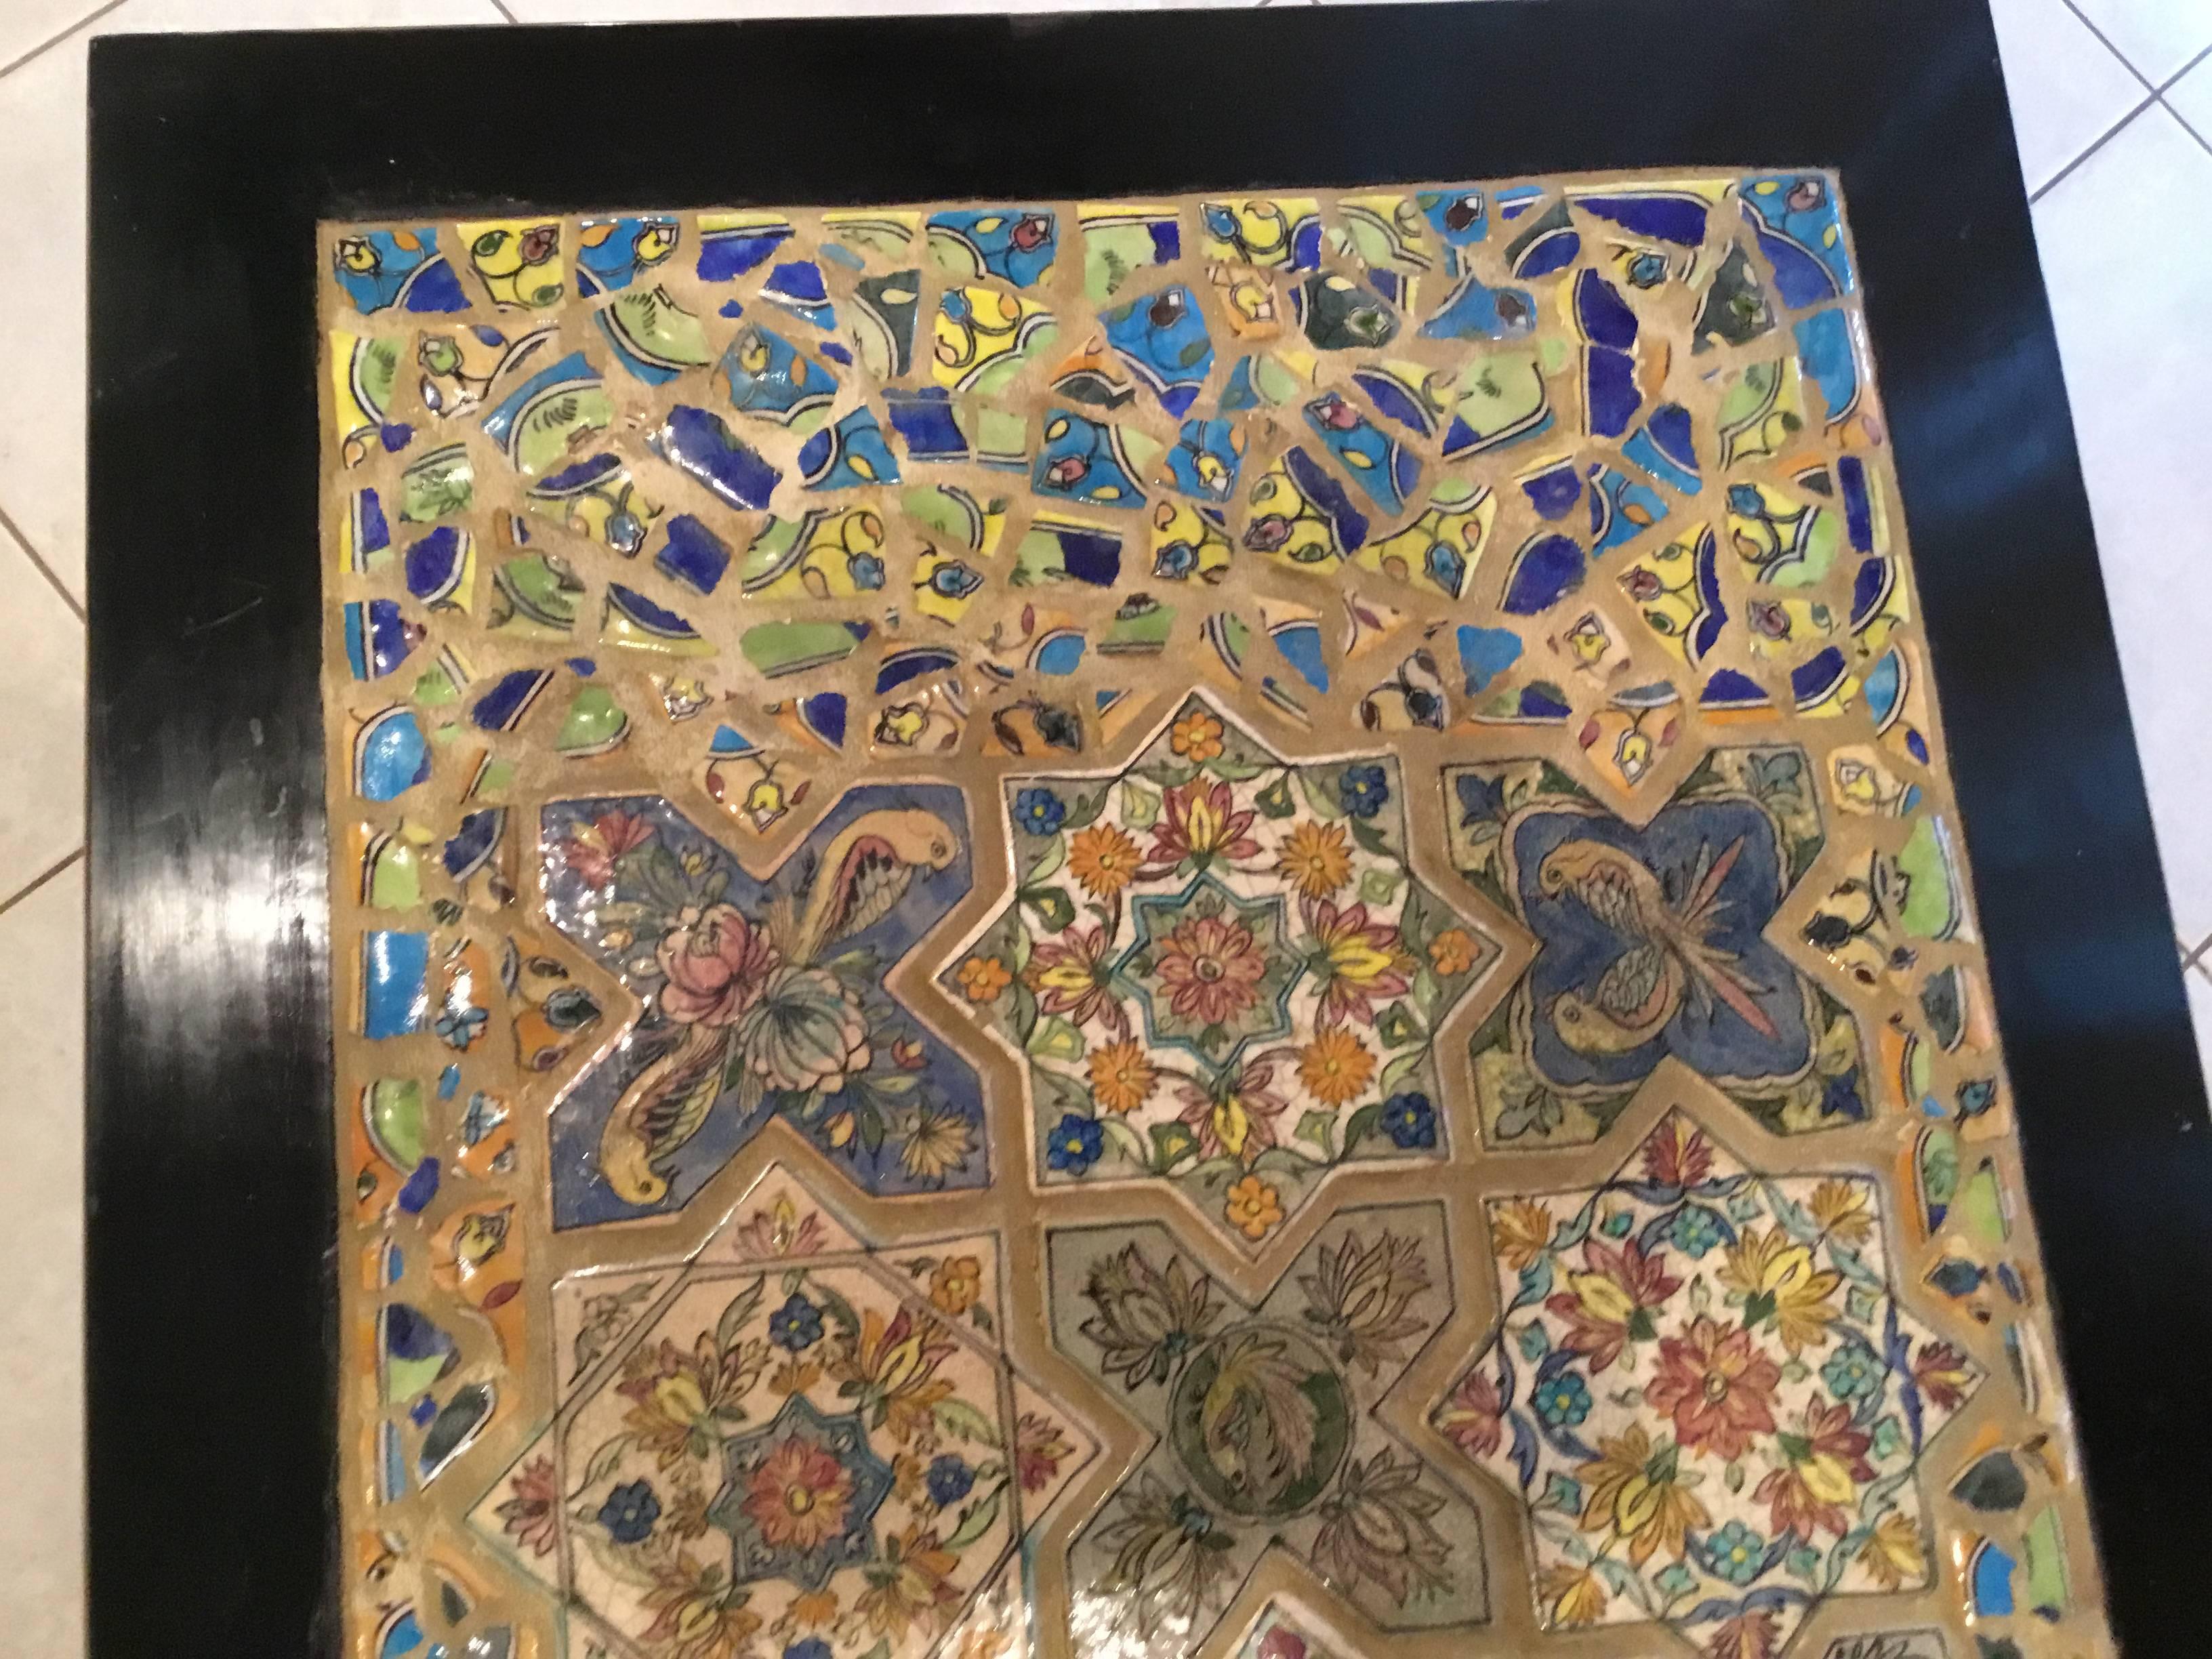 Fantastic one of a kind coffee table made of old Chinese wood coffee table imbedded with beautiful antique Persian ceramic tiles with flowers vines and birds motifs. All surrounded with colorful Persian tile mosaic.
Water repellent top.

